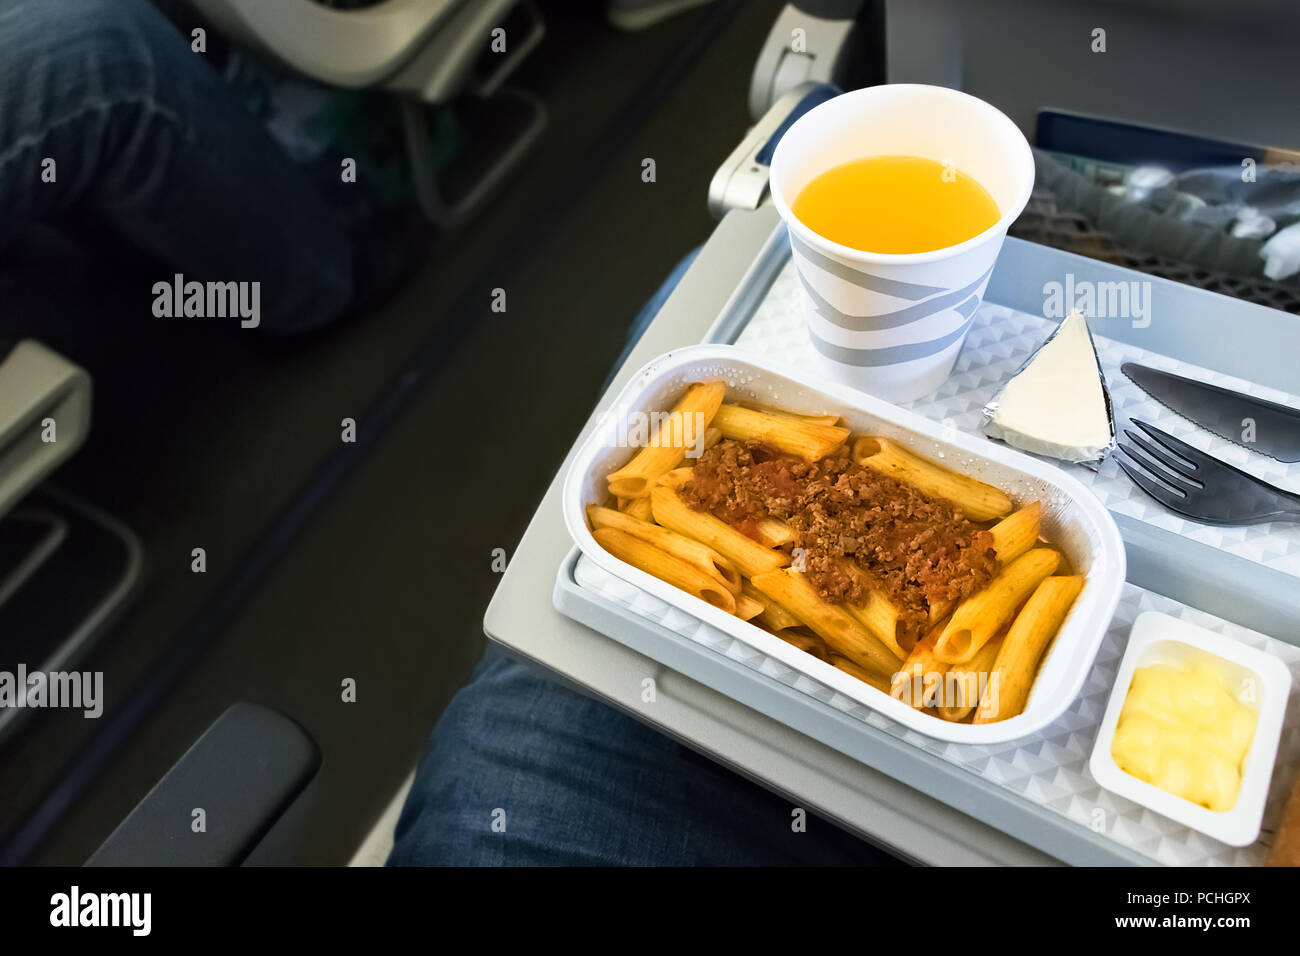 An in flight meal - lunch with orange juice and pasta onboard the economy class of a German Airline.top view. Stock Photo